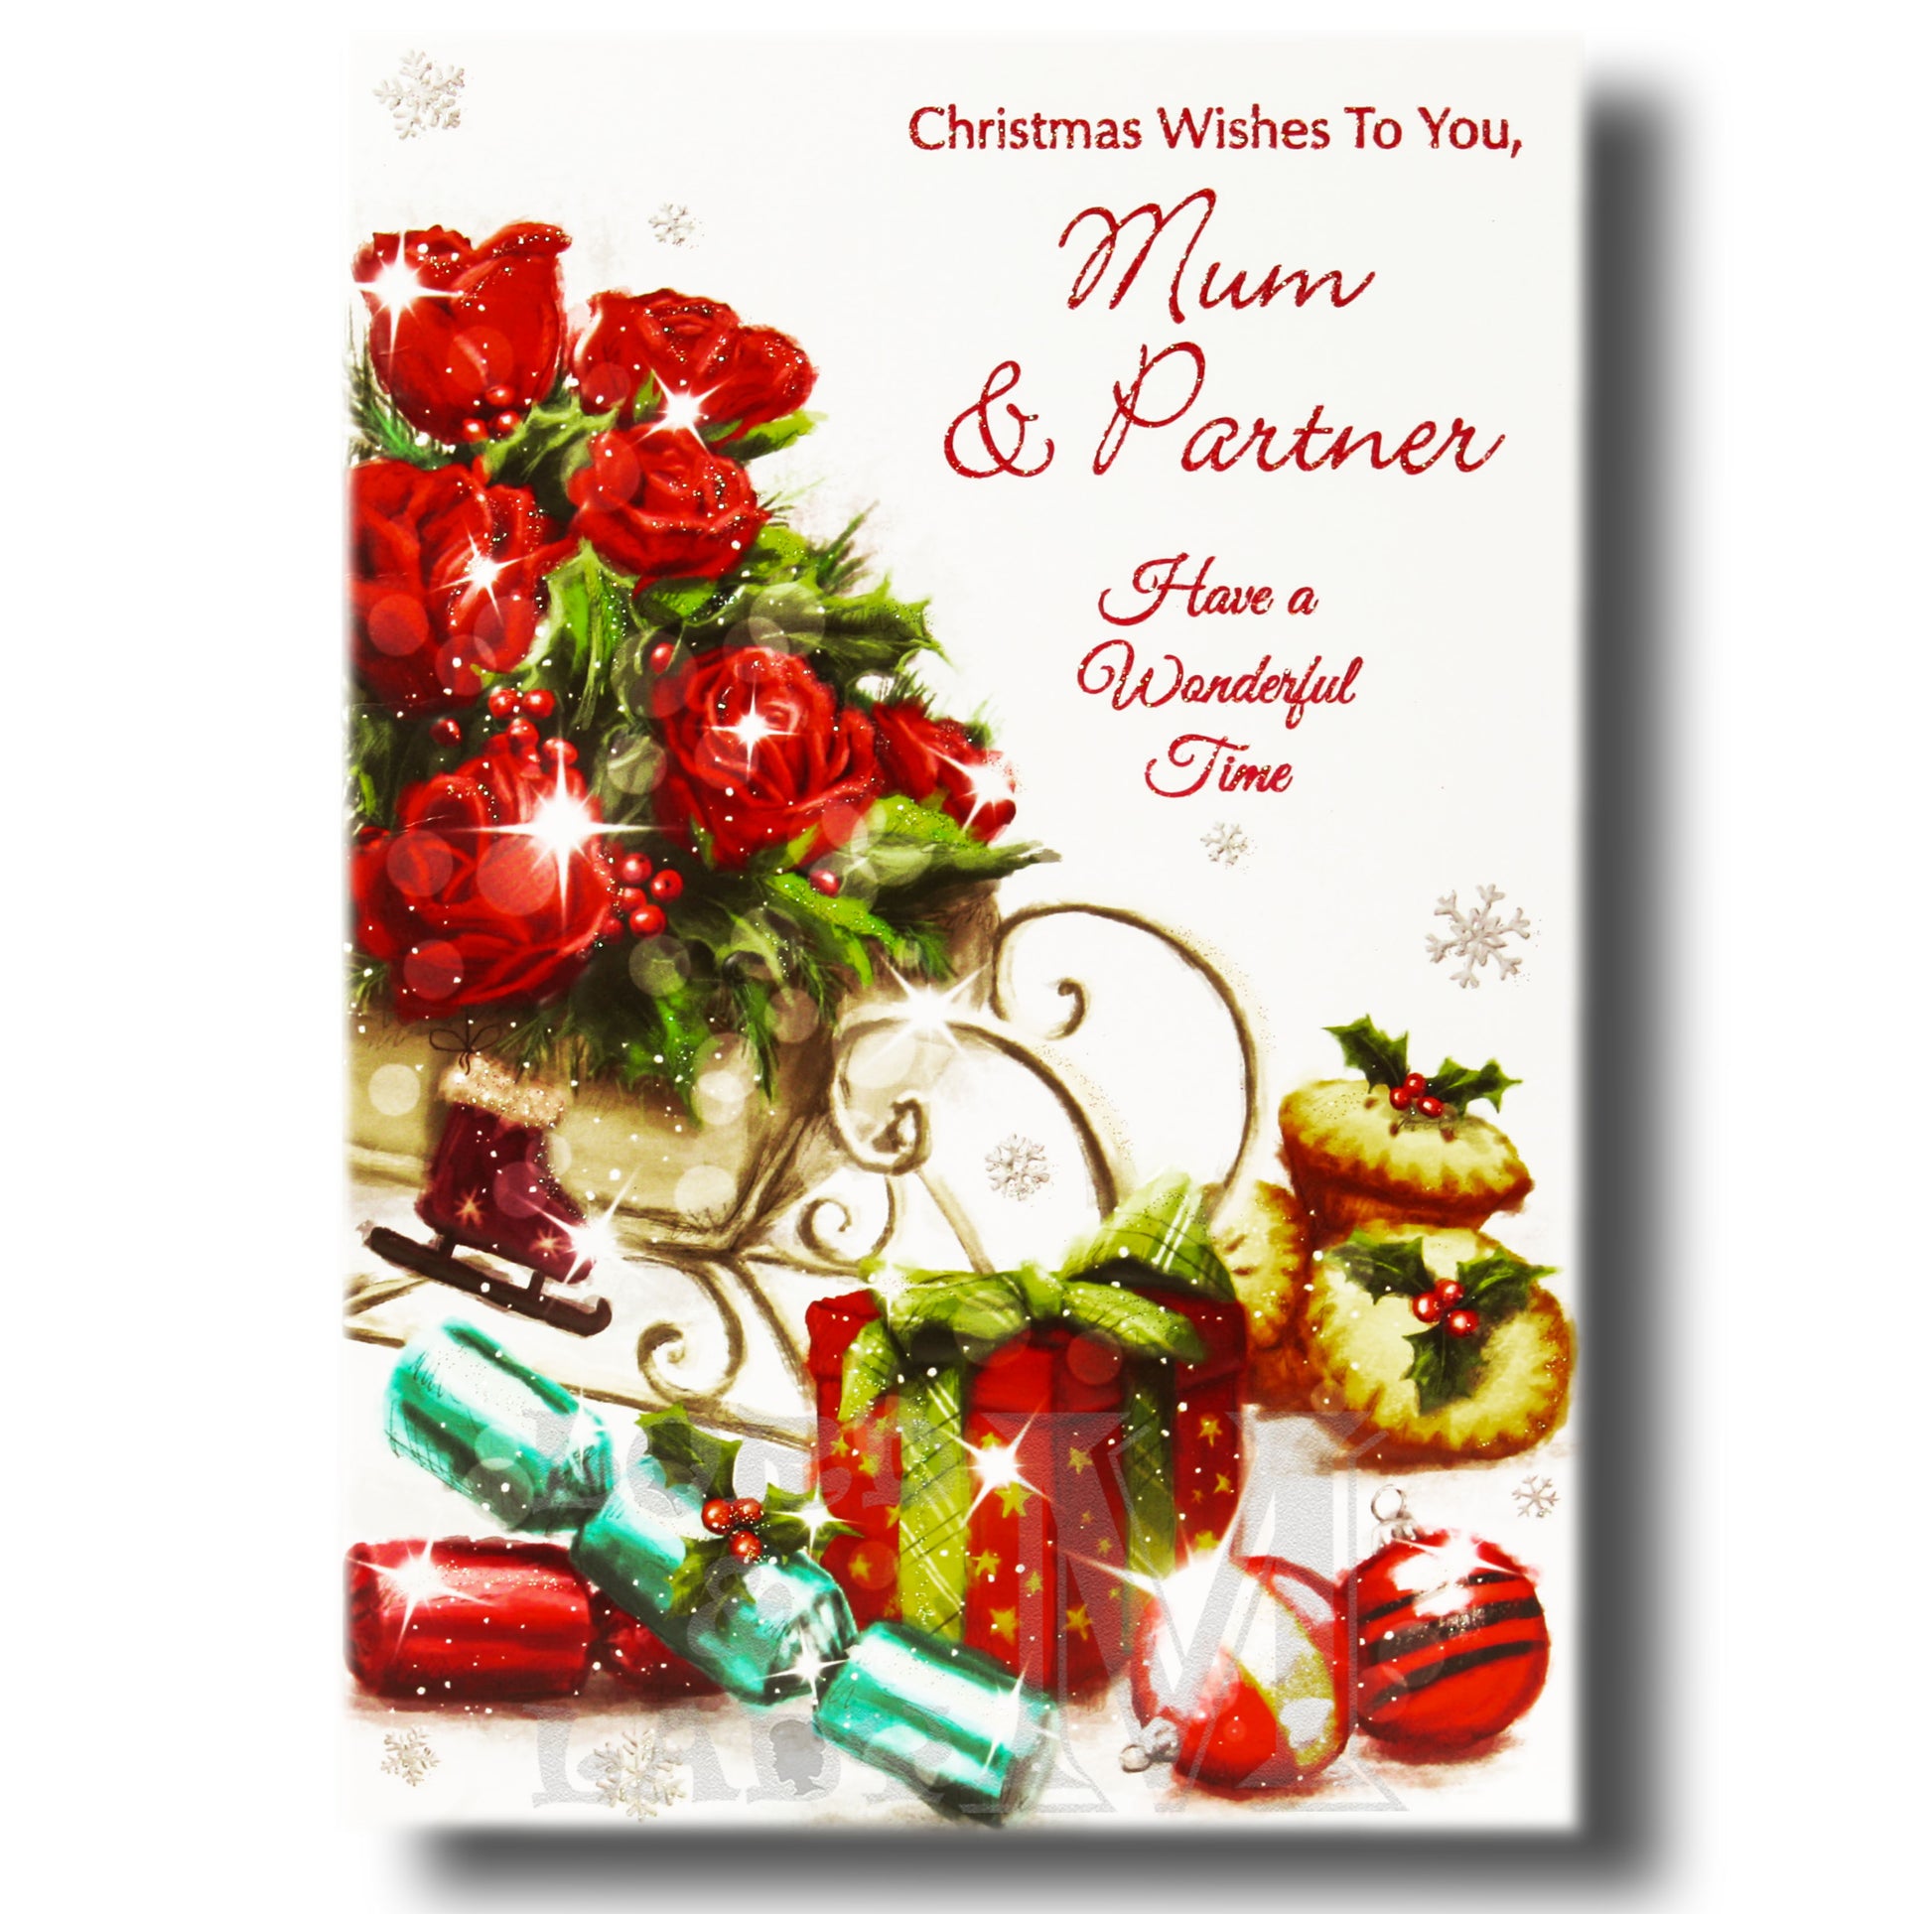 19cm - Christmas Wishes To You, Mum & Partner - GH